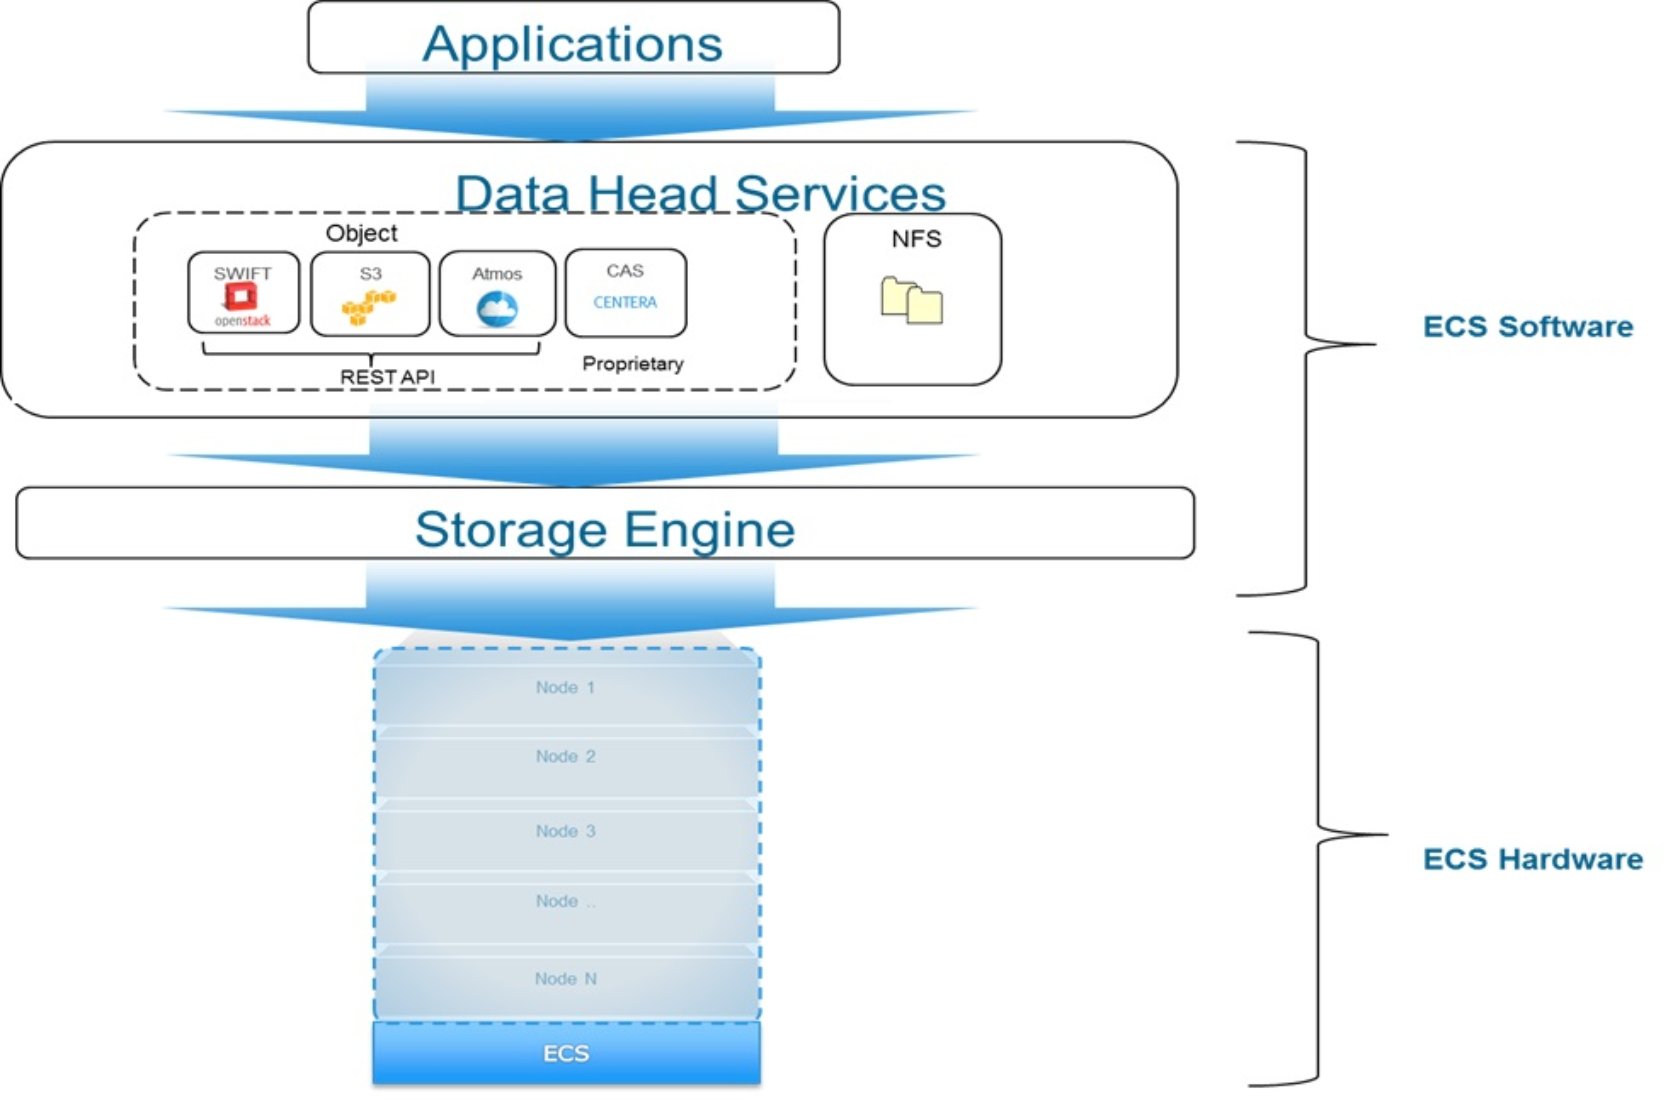 This is an overview of ECS architecture, with Data head services and storage engine.